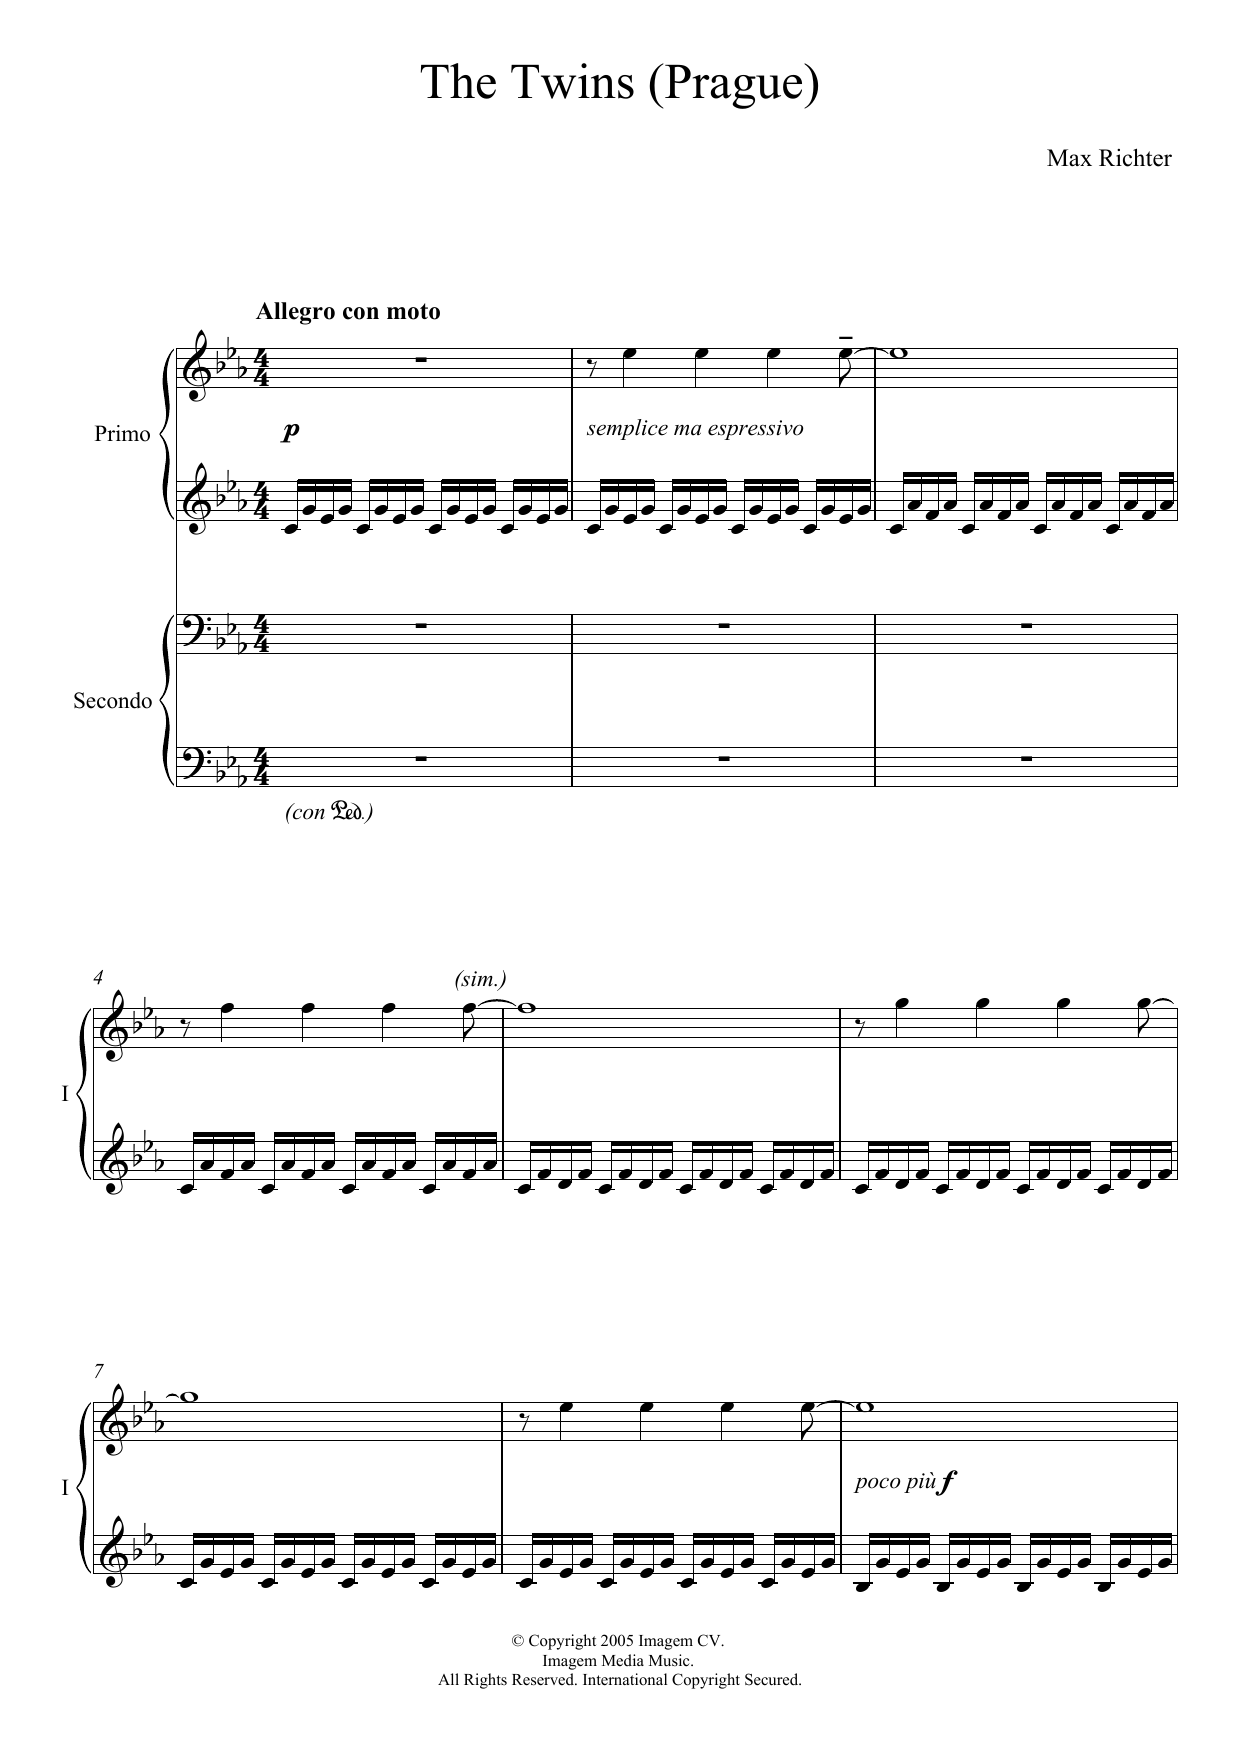 Download Max Richter The Twins Sheet Music